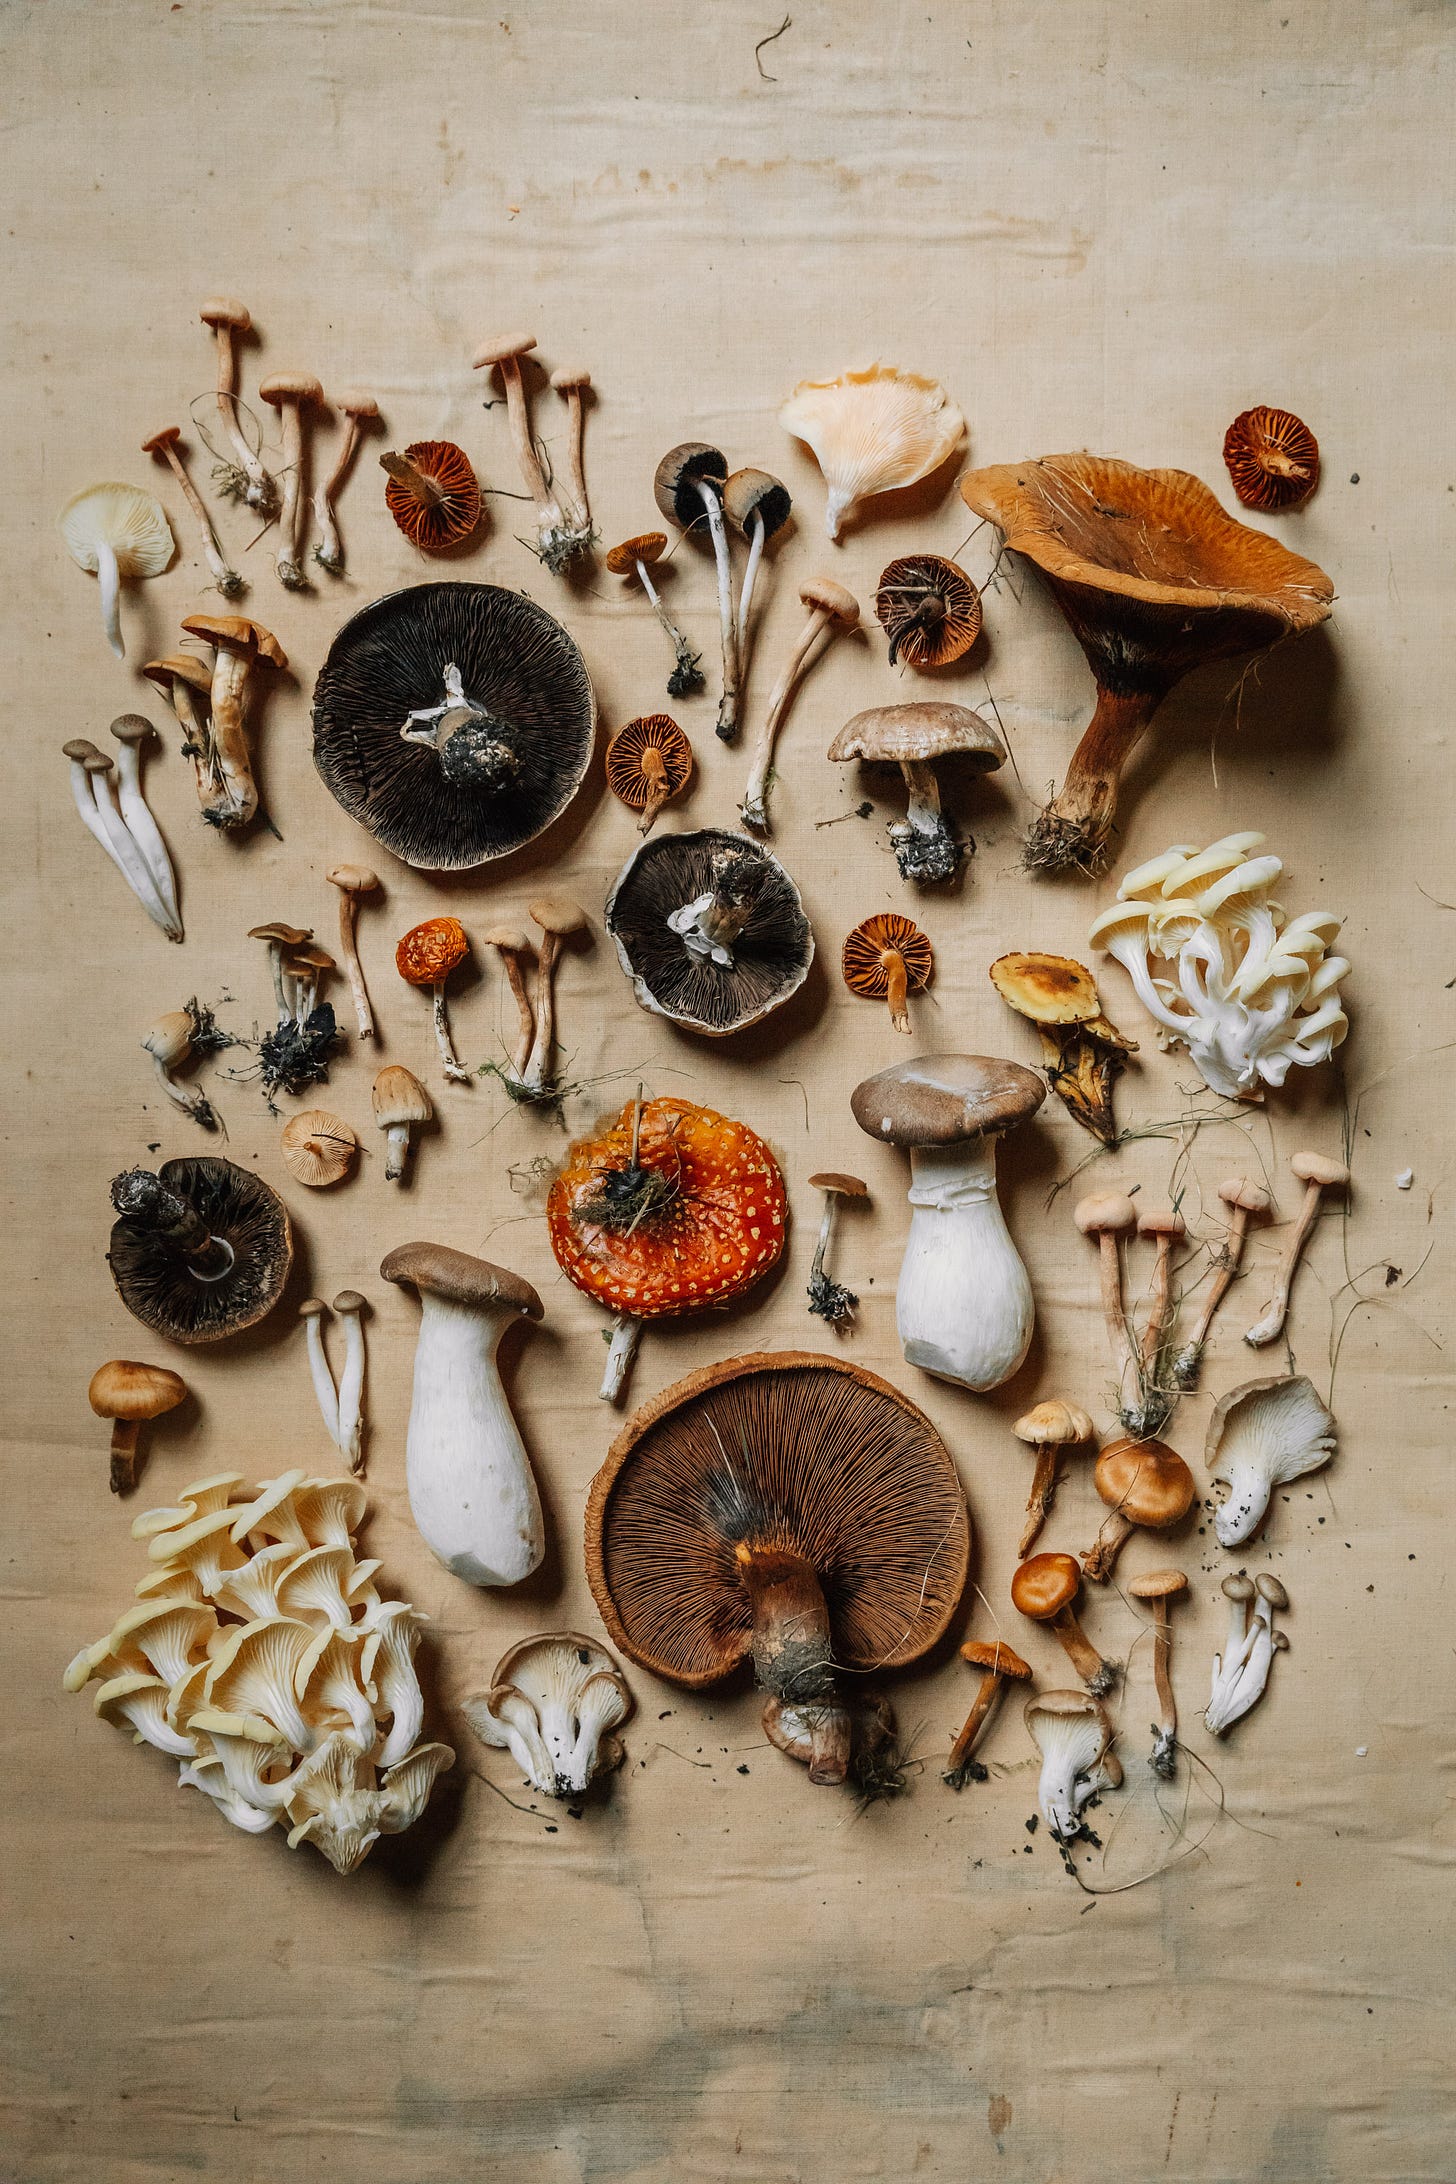 A flatly of lots of different types of mushrooms.